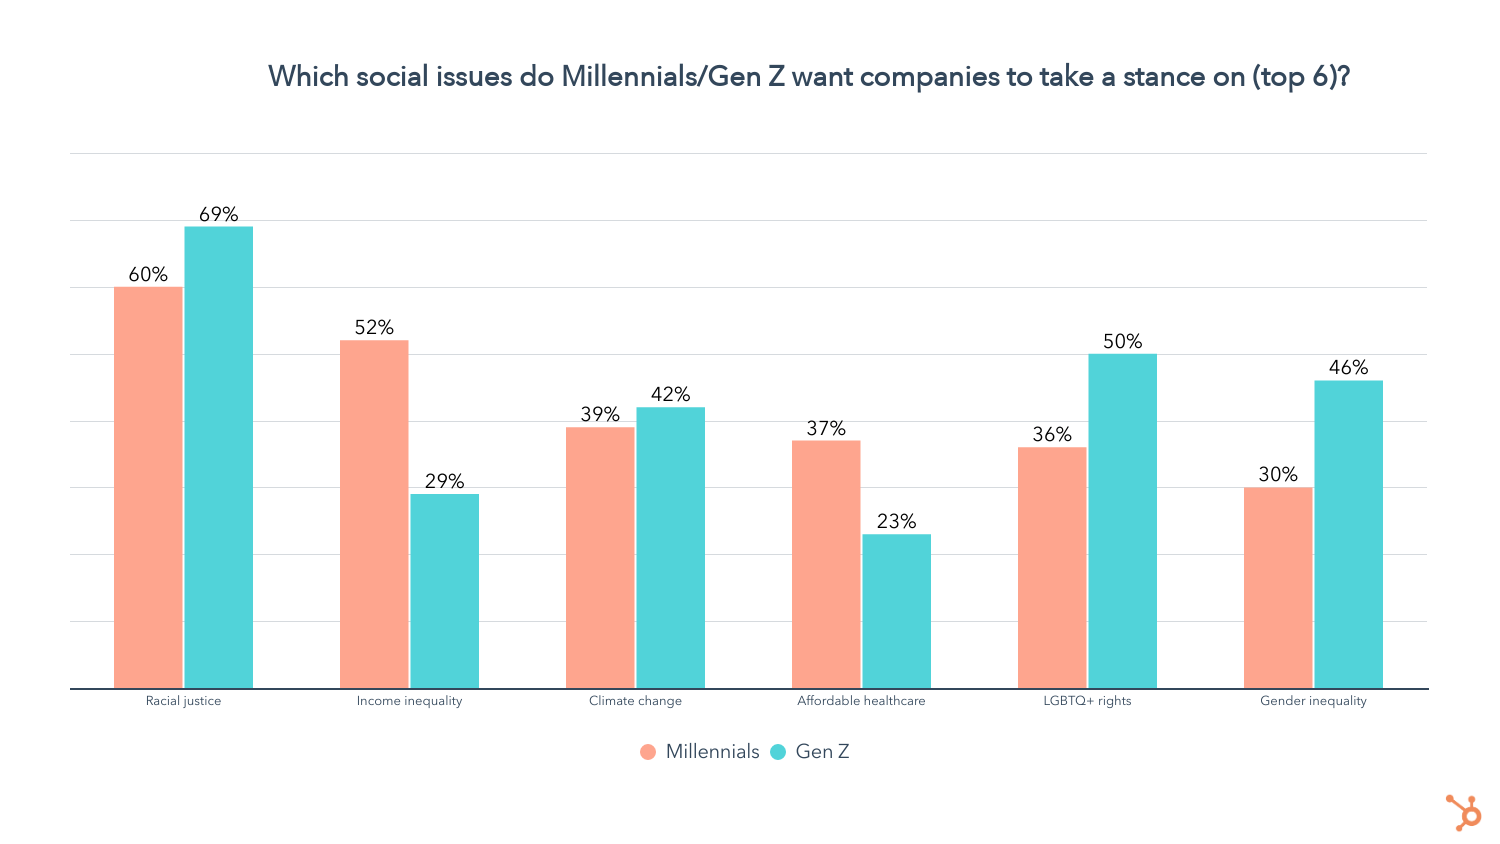 gen z vs. millennial, which issues should companies take a stance on